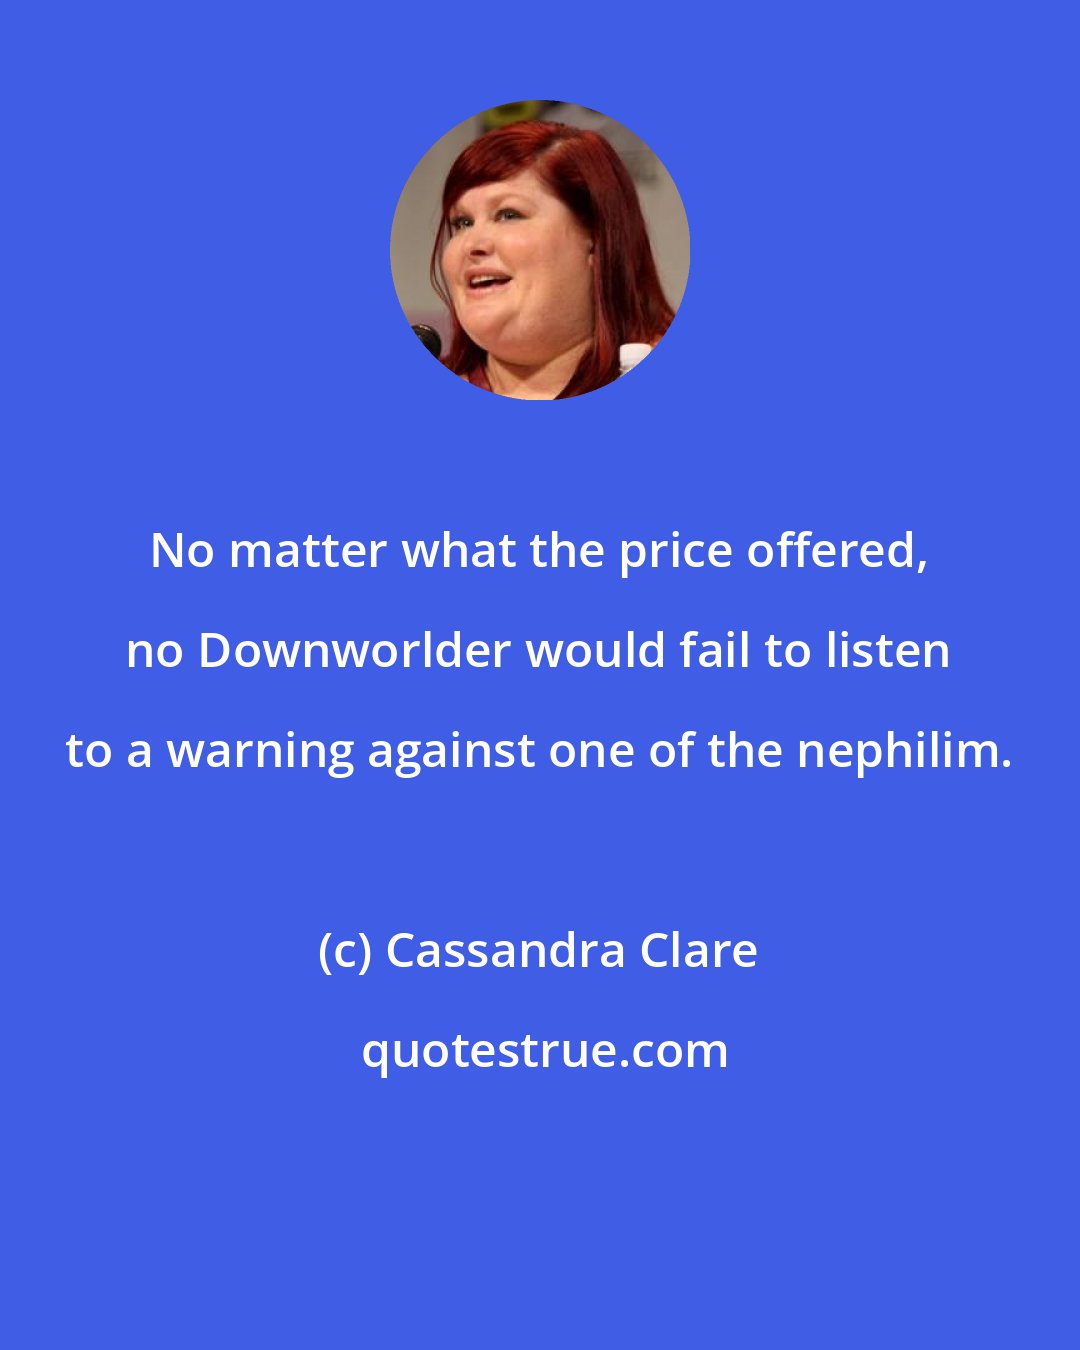 Cassandra Clare: No matter what the price offered, no Downworlder would fail to listen to a warning against one of the nephilim.